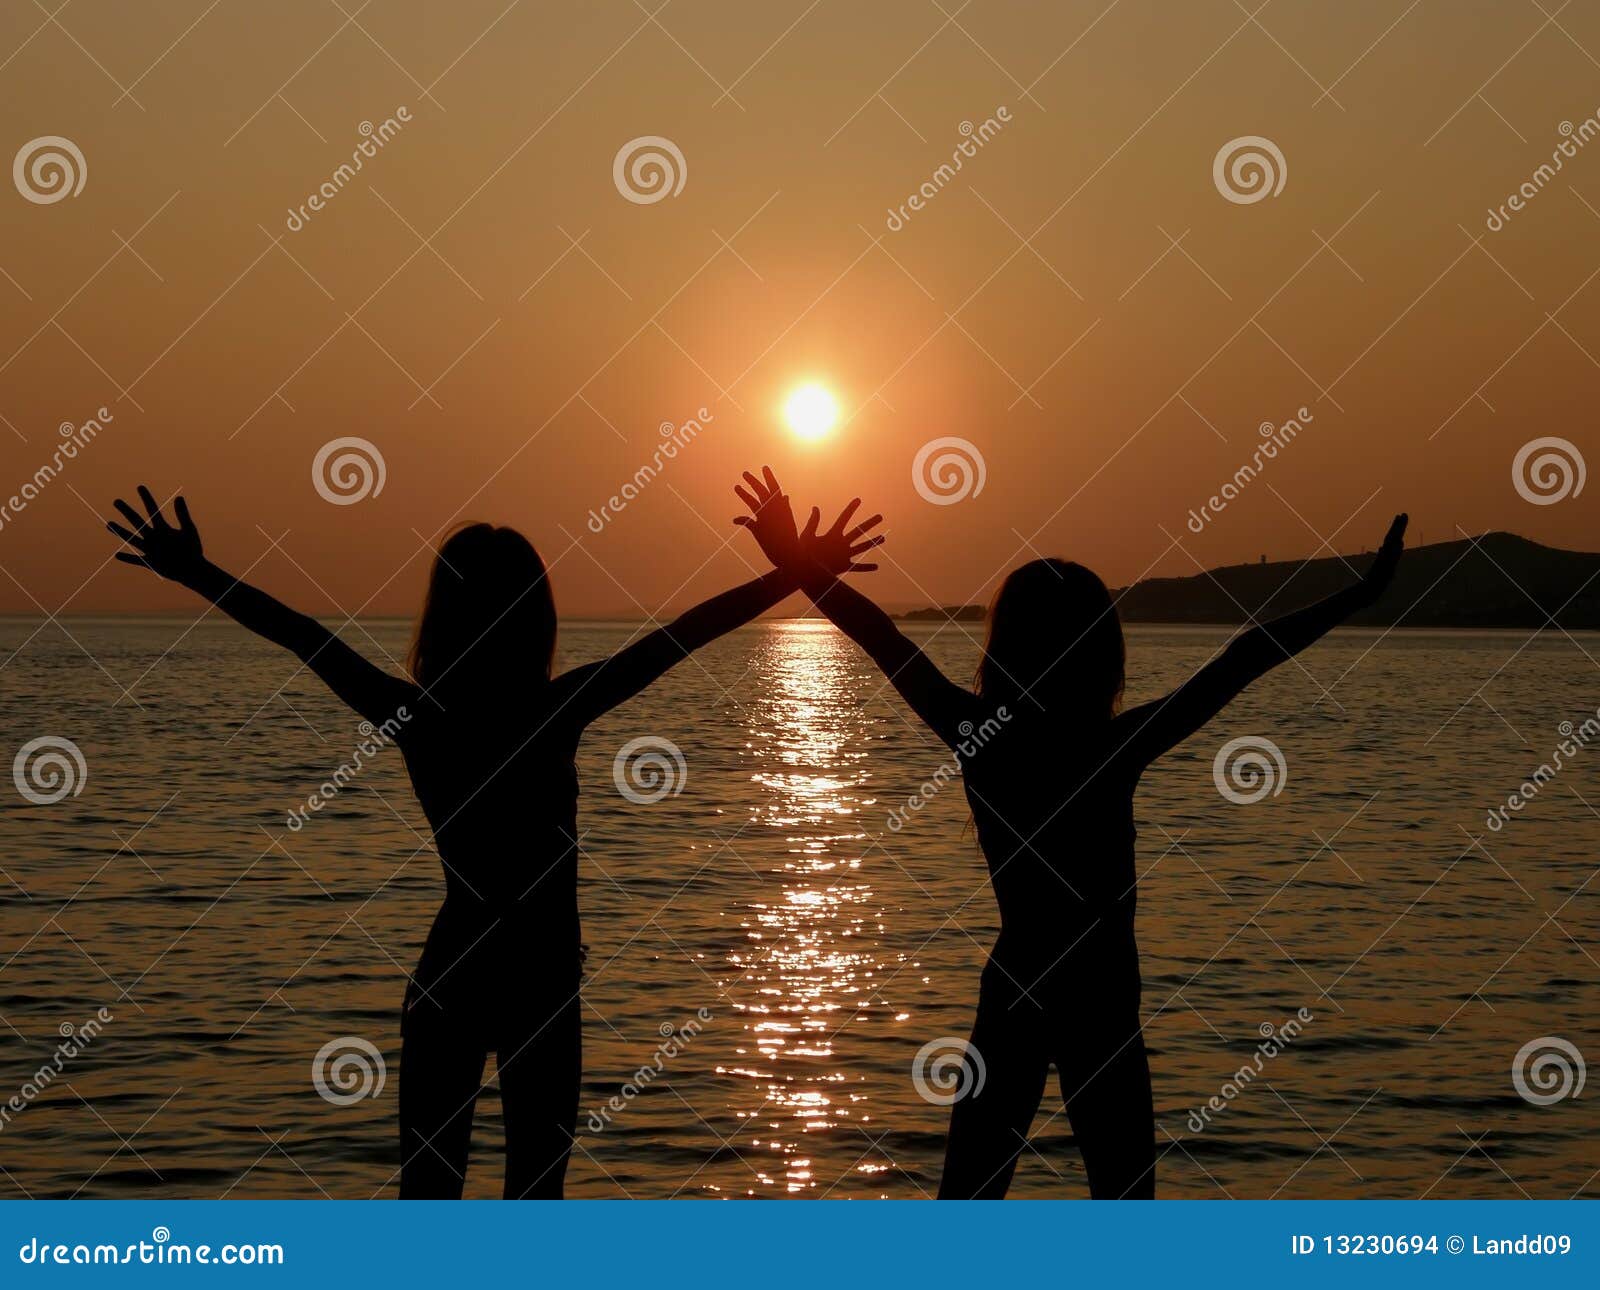 sisters in sunset